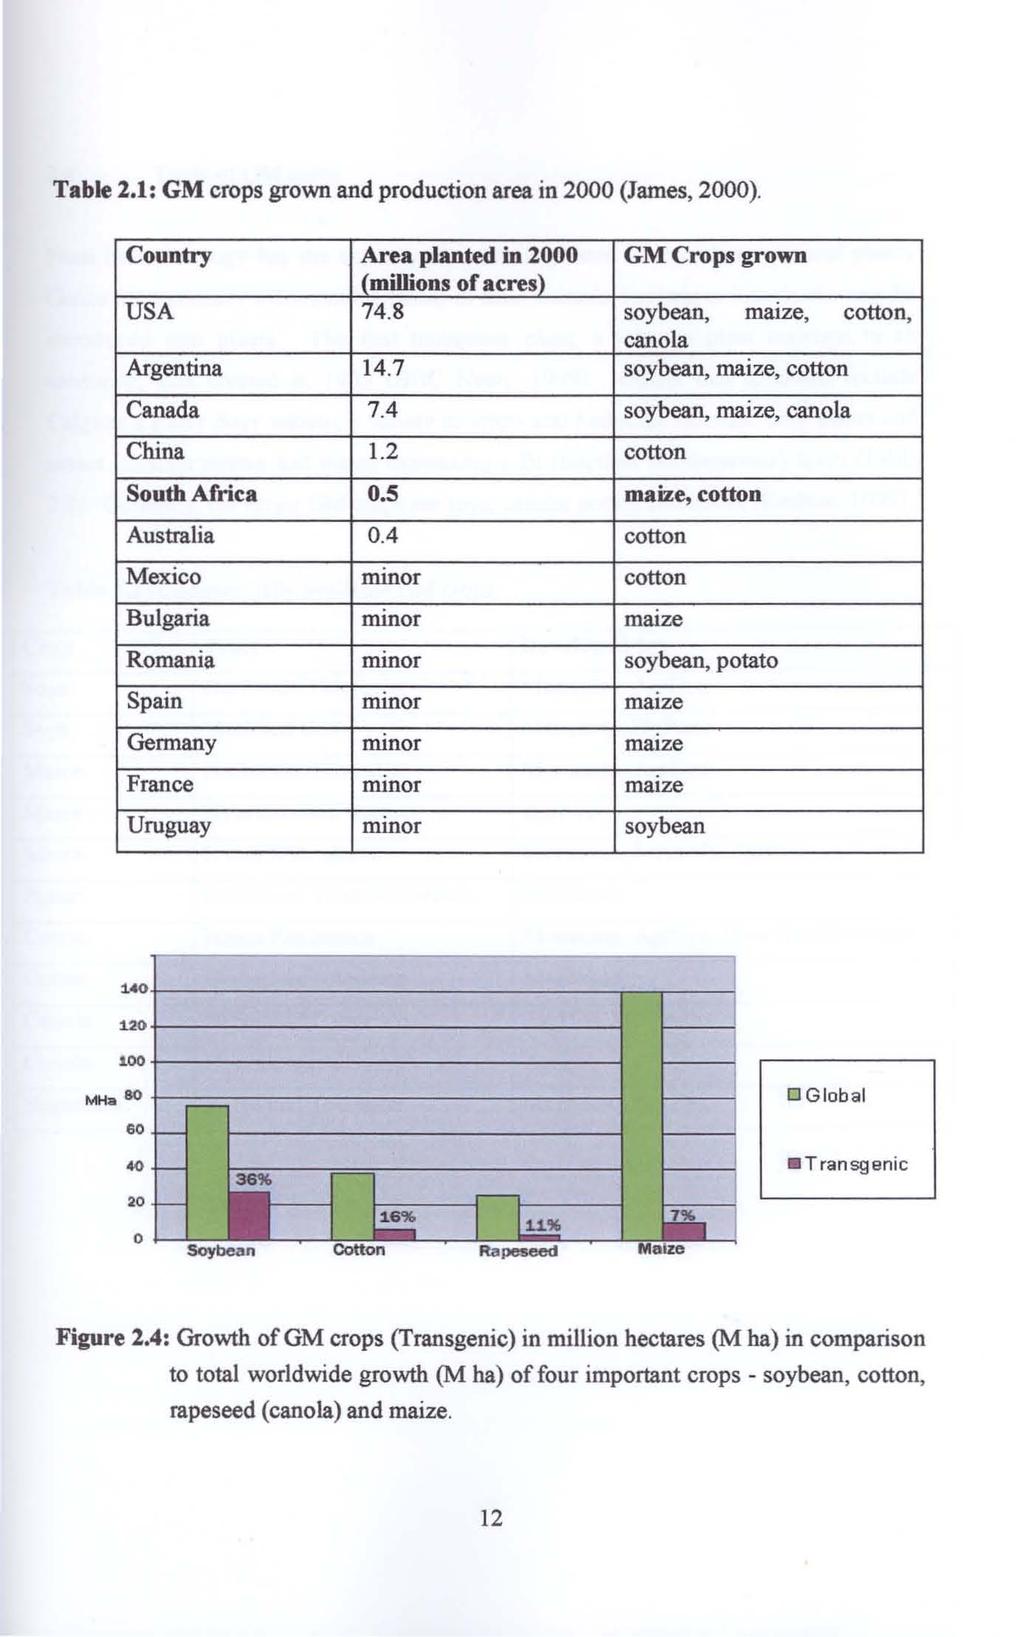 Table 2.1: GM crops grown and production area in 2000 (James, 2000). Country Area planted in 2000 GM Crops grown (millions of acres) USA 74.8 soybean, maize, cotton, canola Argentina 14.